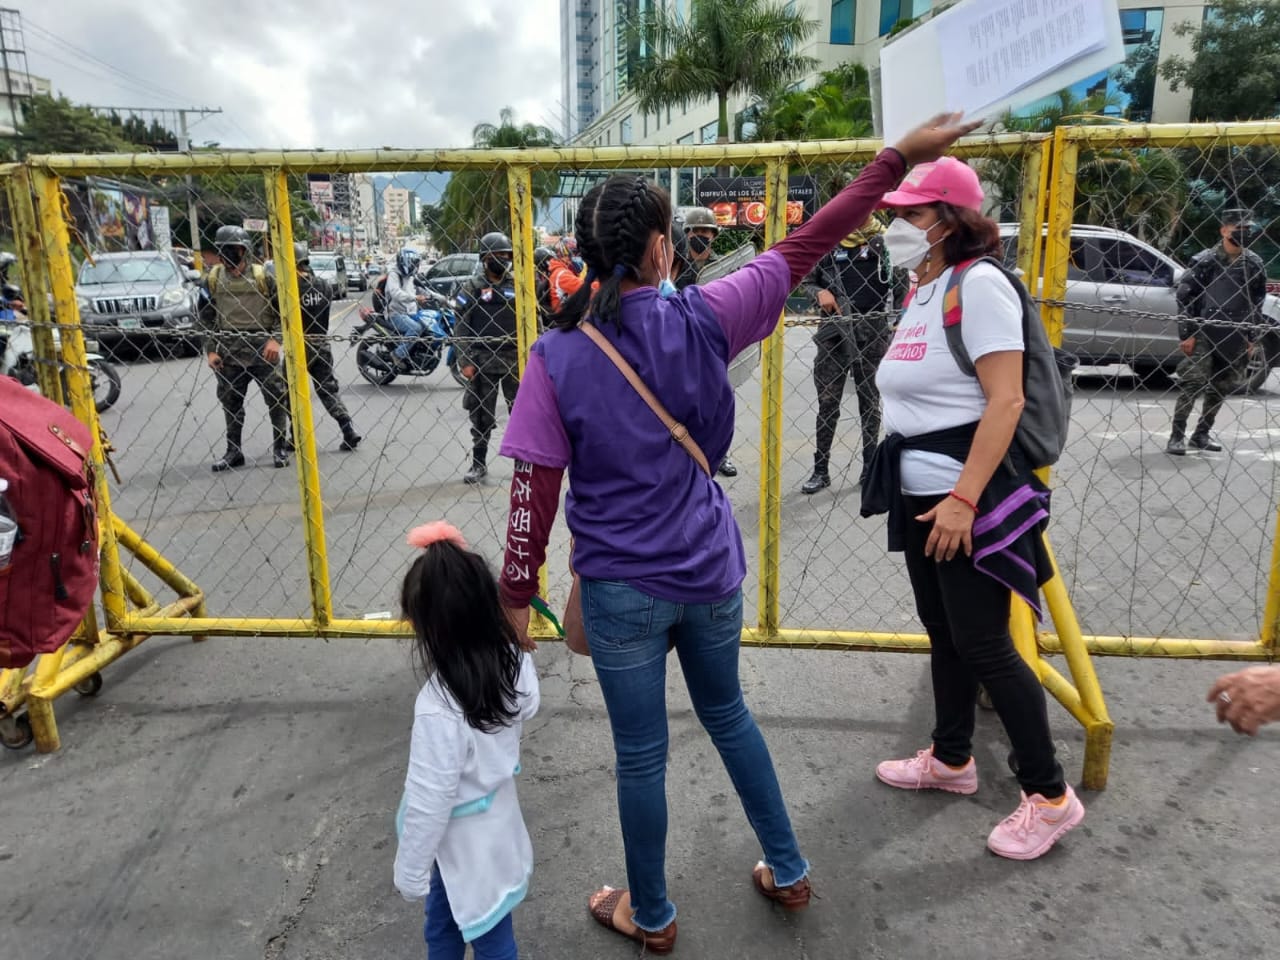 One woman holding a child's hand and carrying a sign in her other hand is talking to another woman wearing a mask. Military officers can be seen in the back, behind a fence.